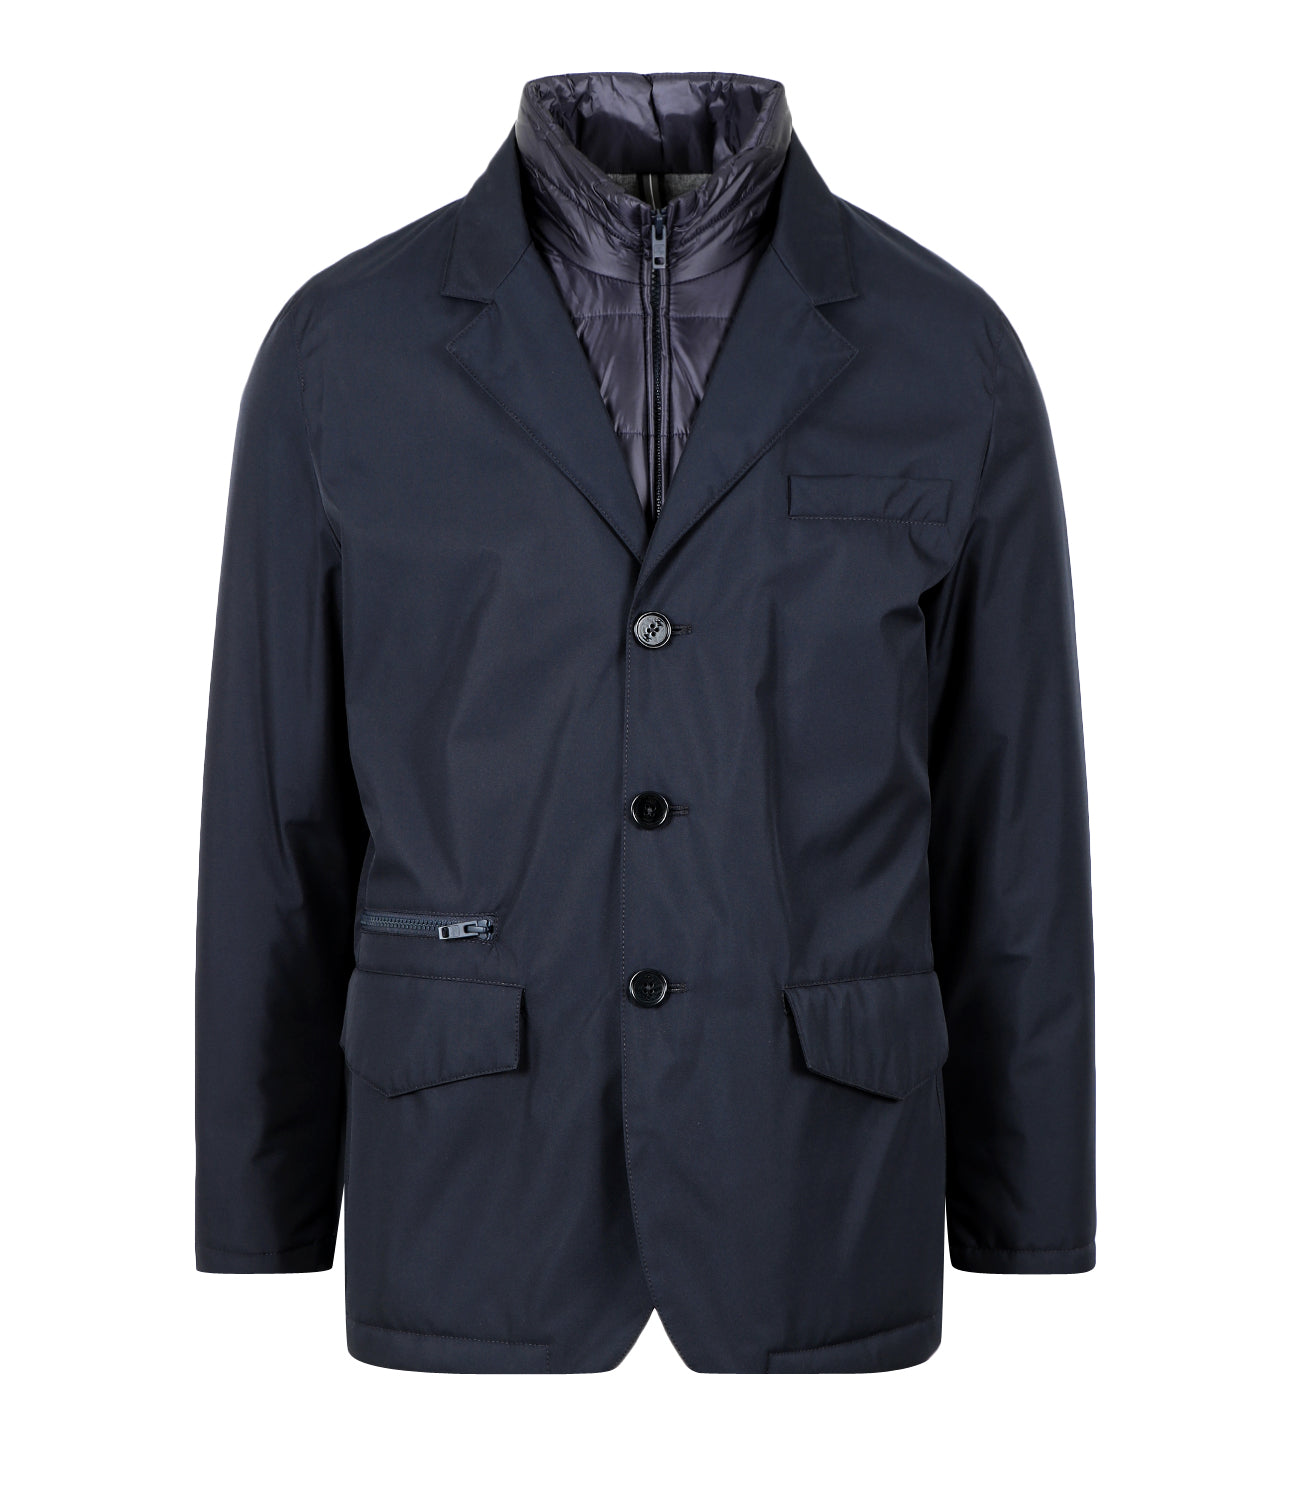 Giacca Double Front Blu Navy